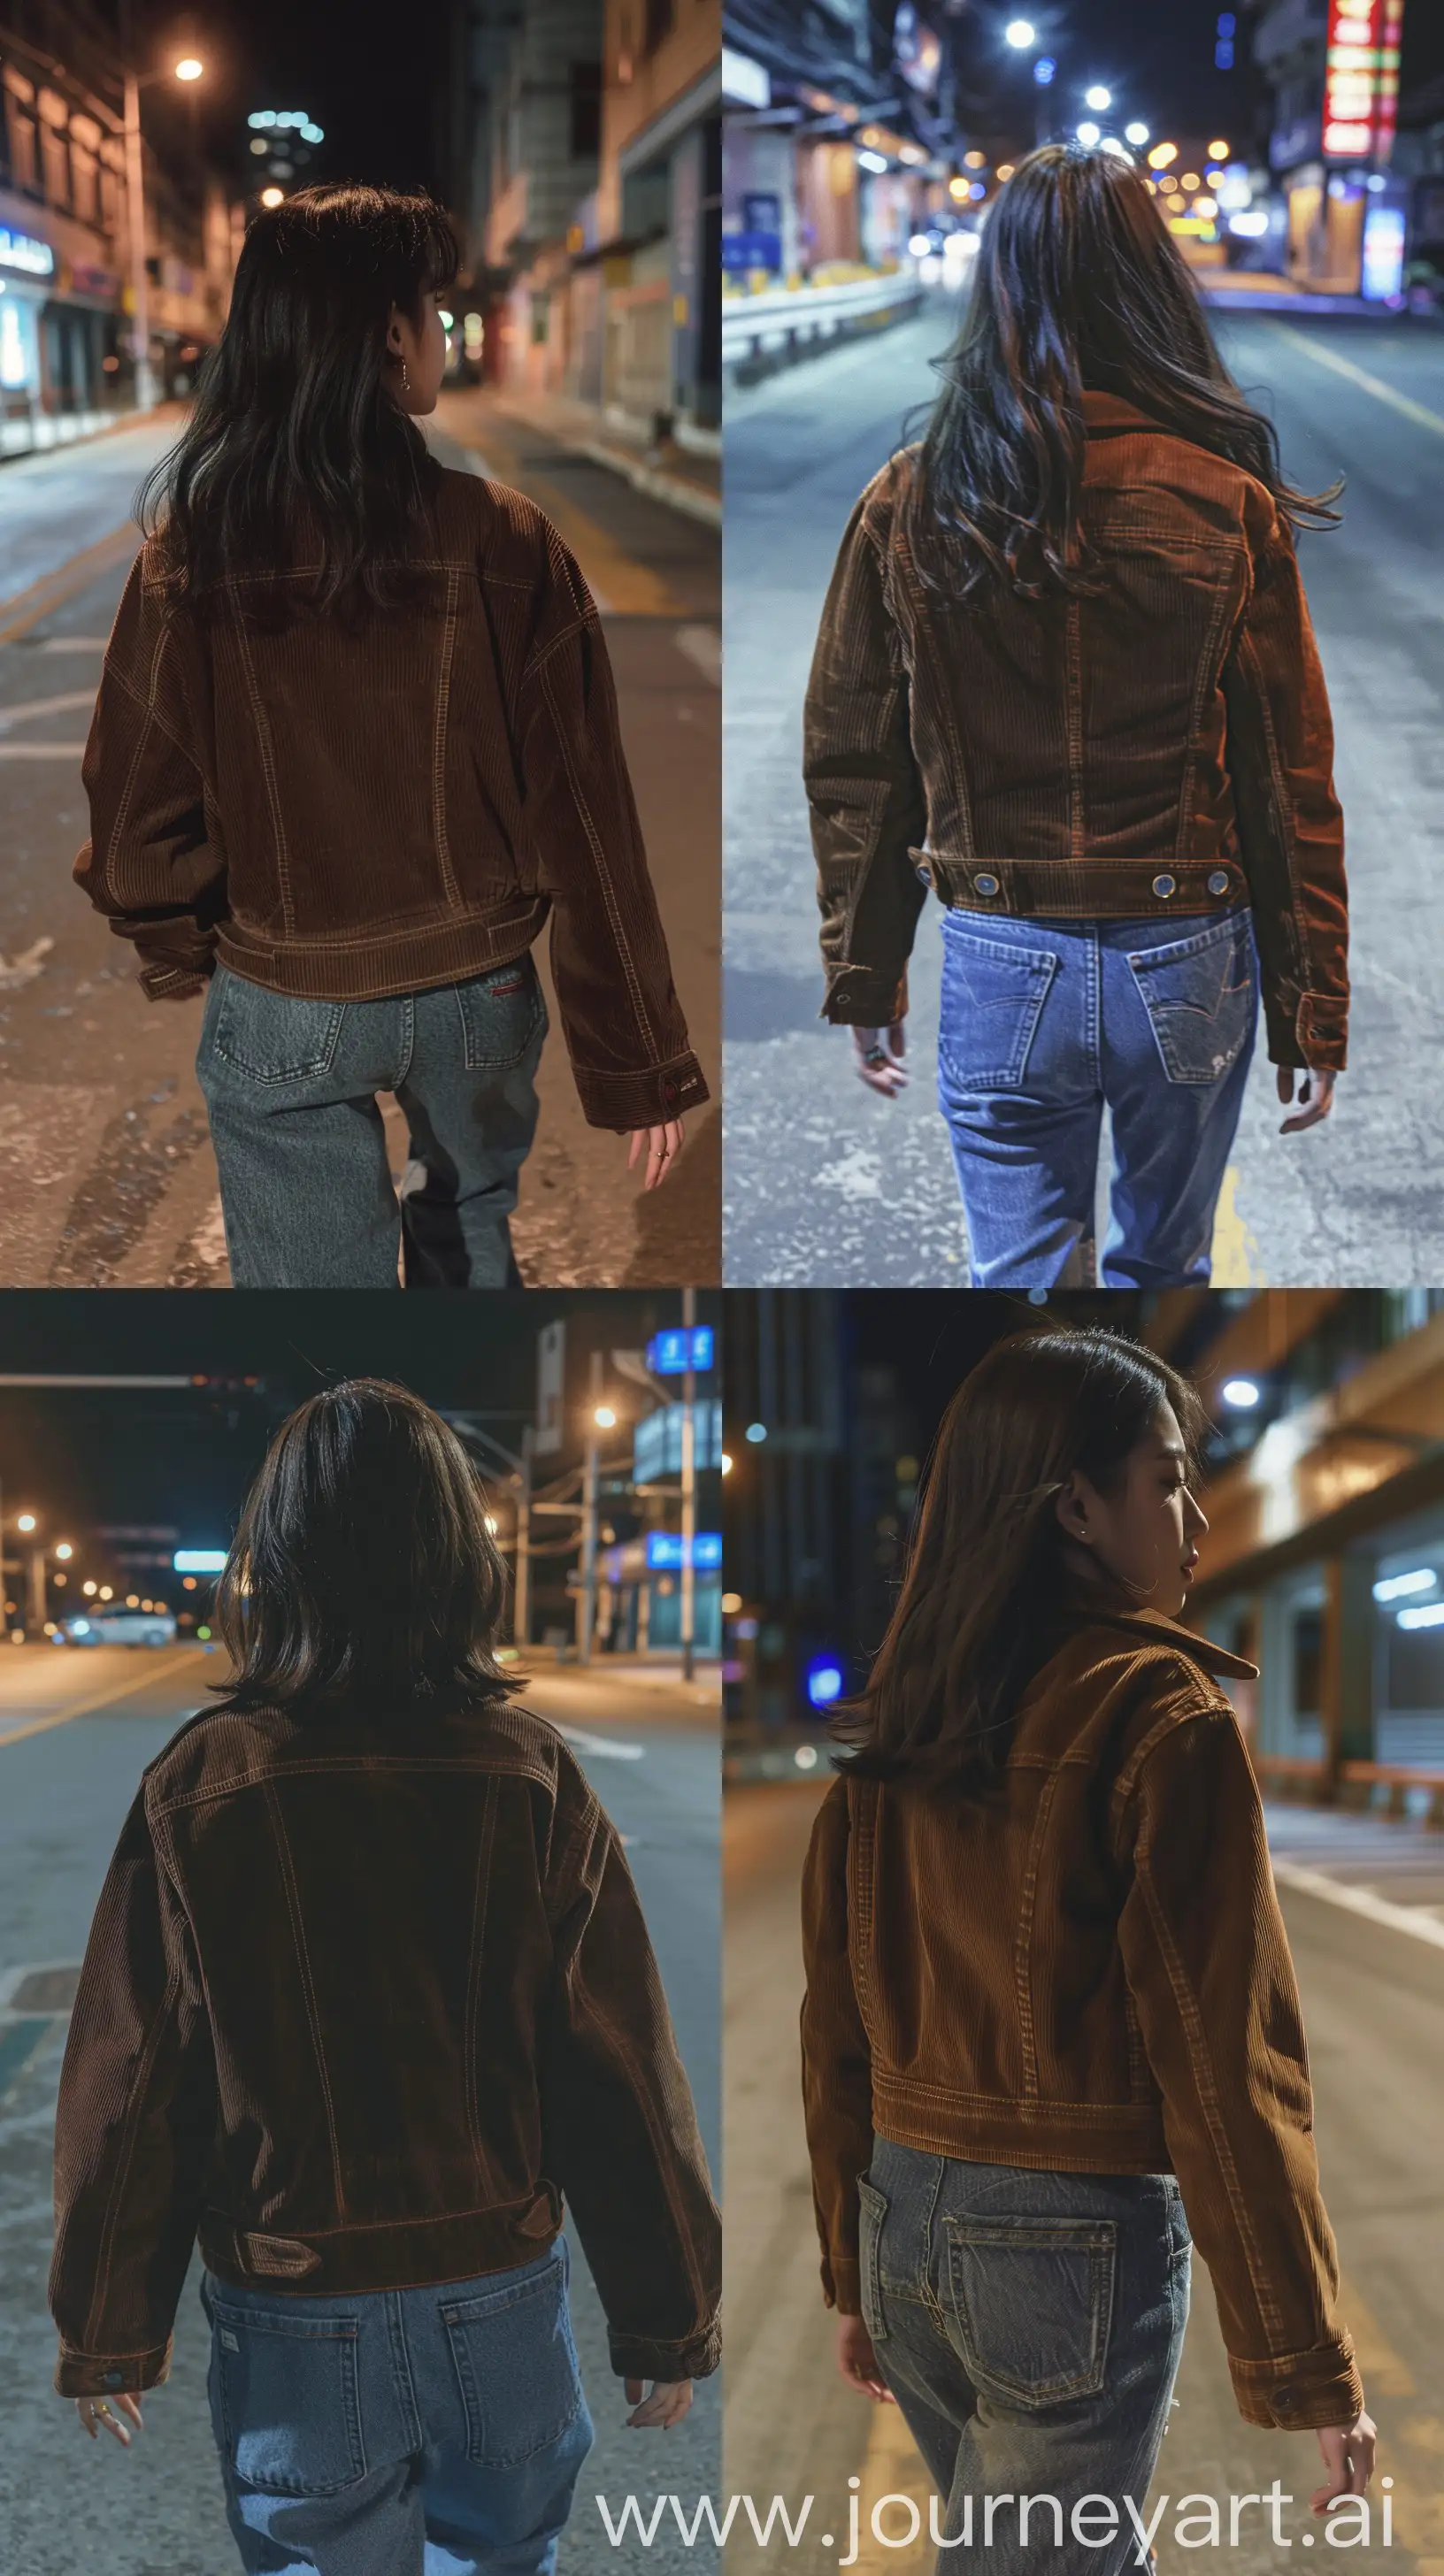 Chic-Night-Stroll-Blackpinks-Jennie-in-Brown-Corduroy-Jacket-and-Jeans